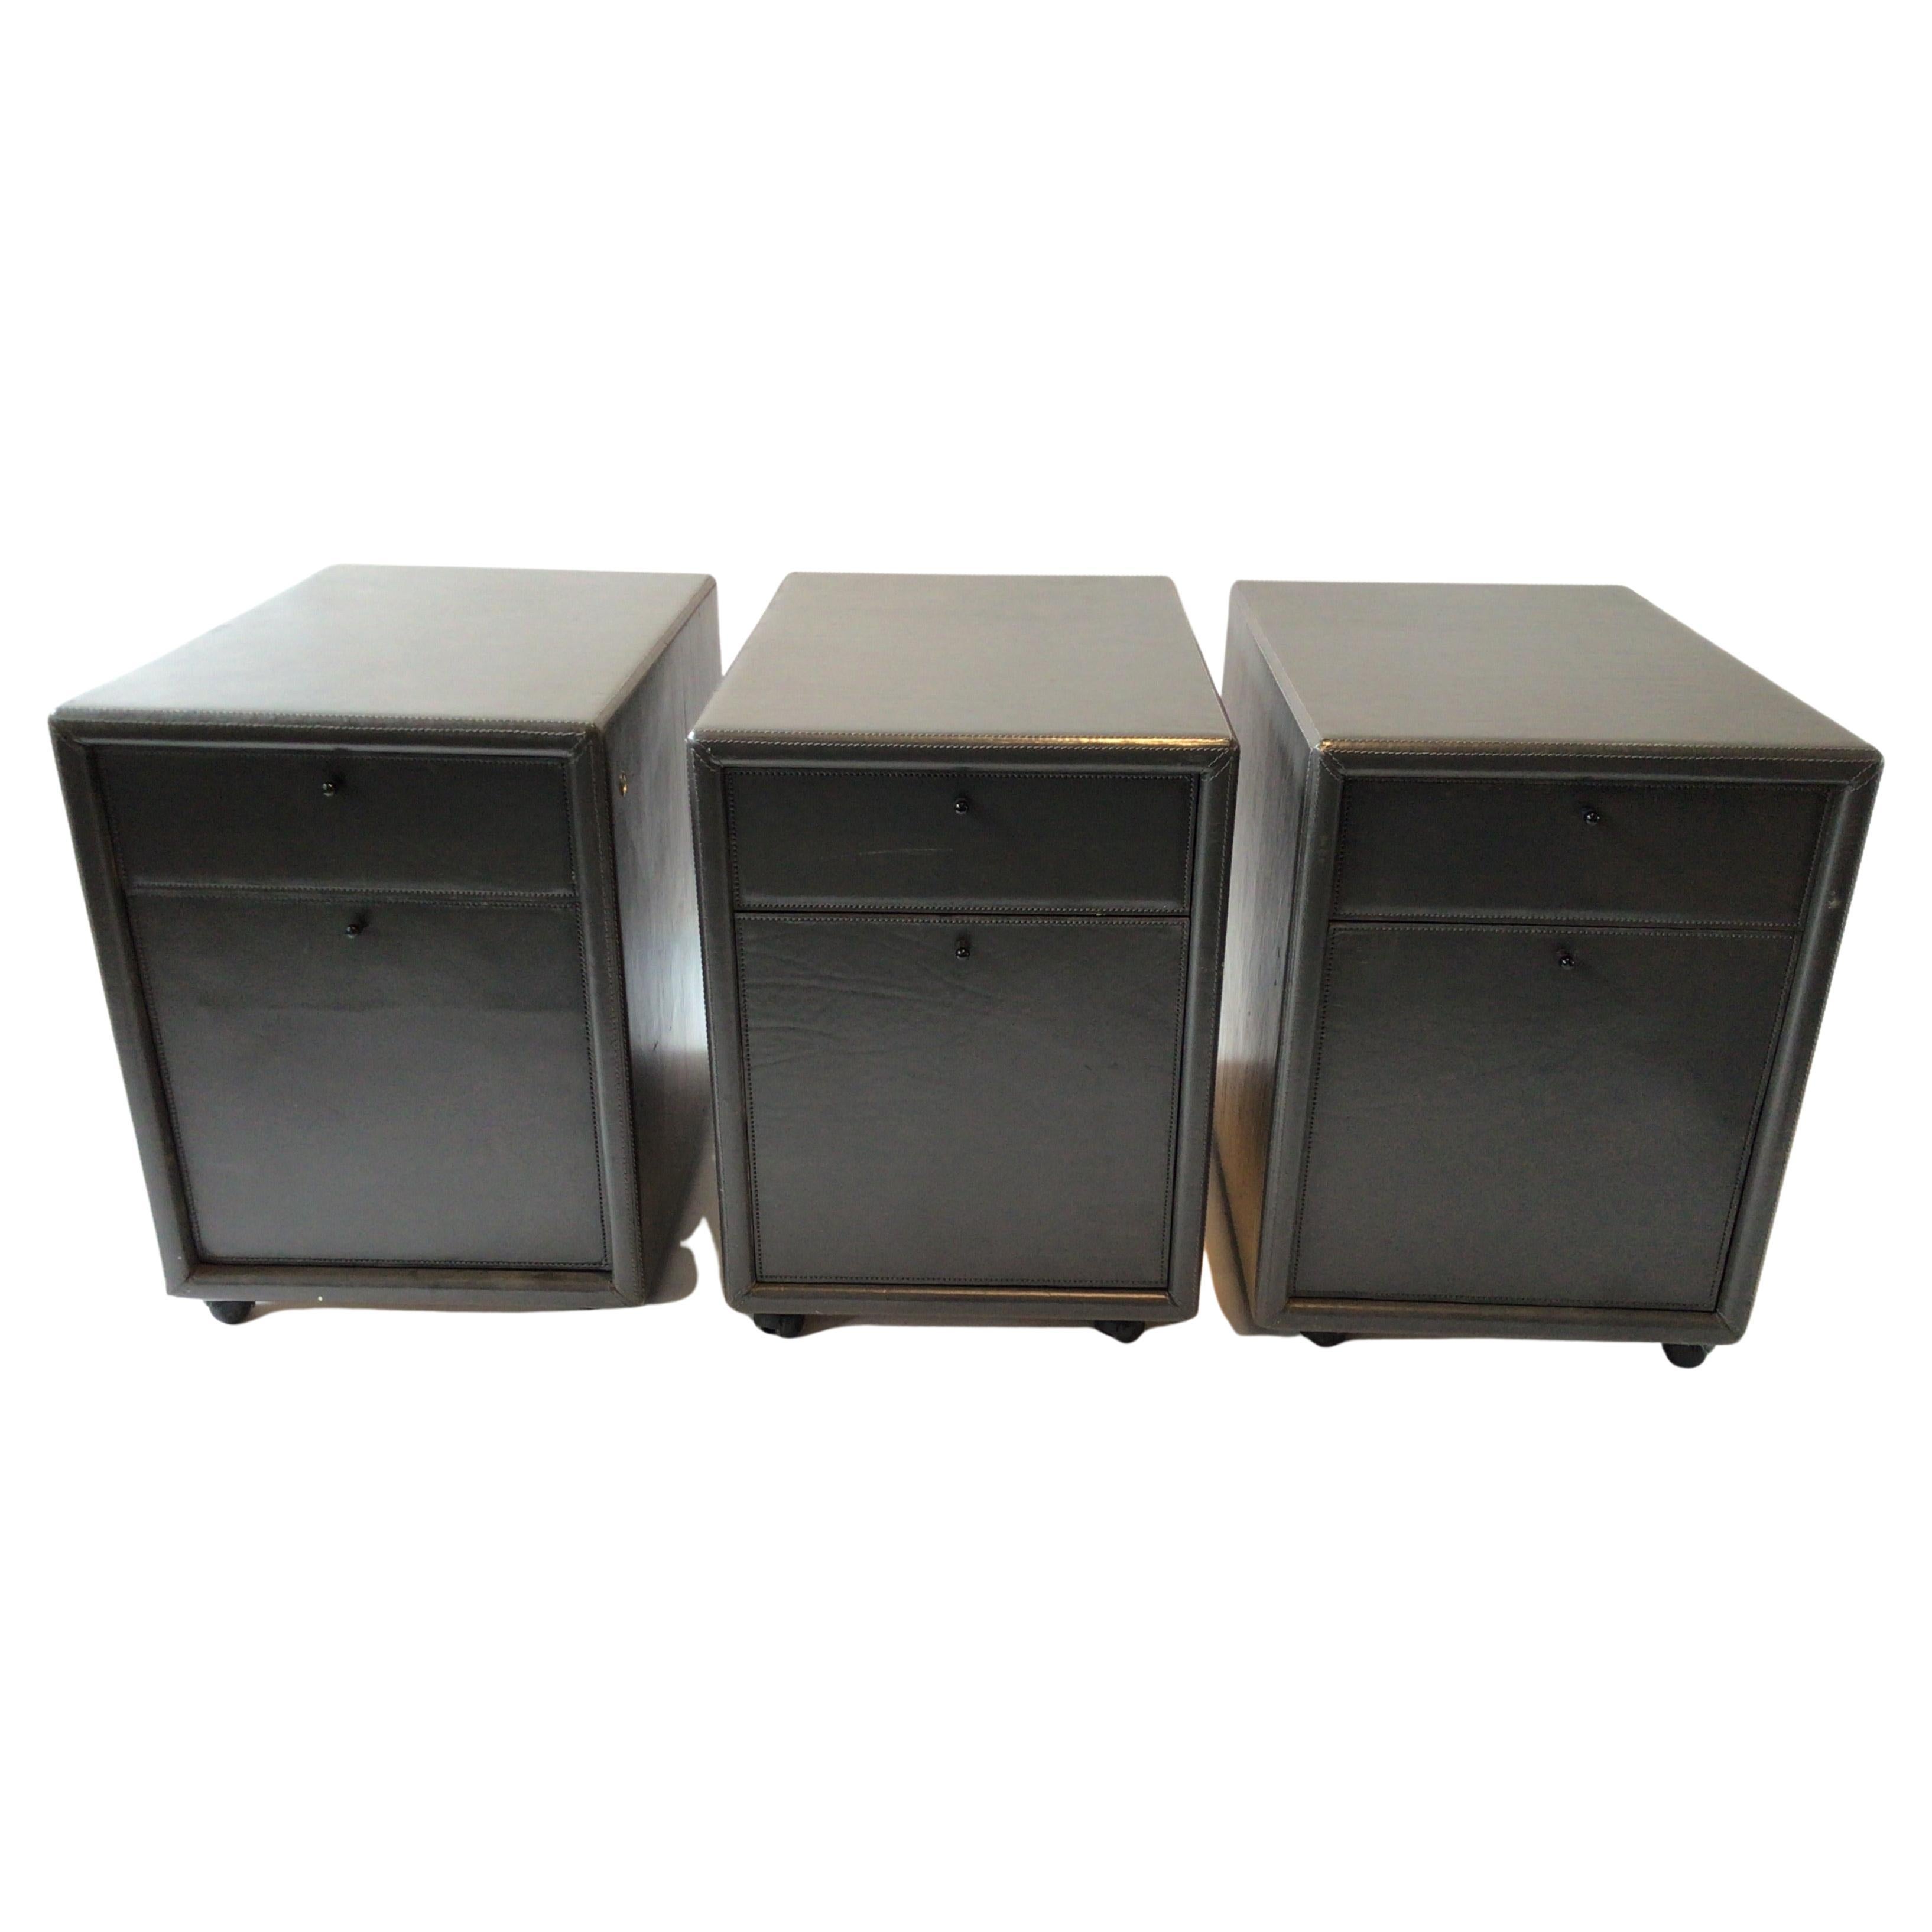 3 Cy Mann Italian Leather File Cabinets